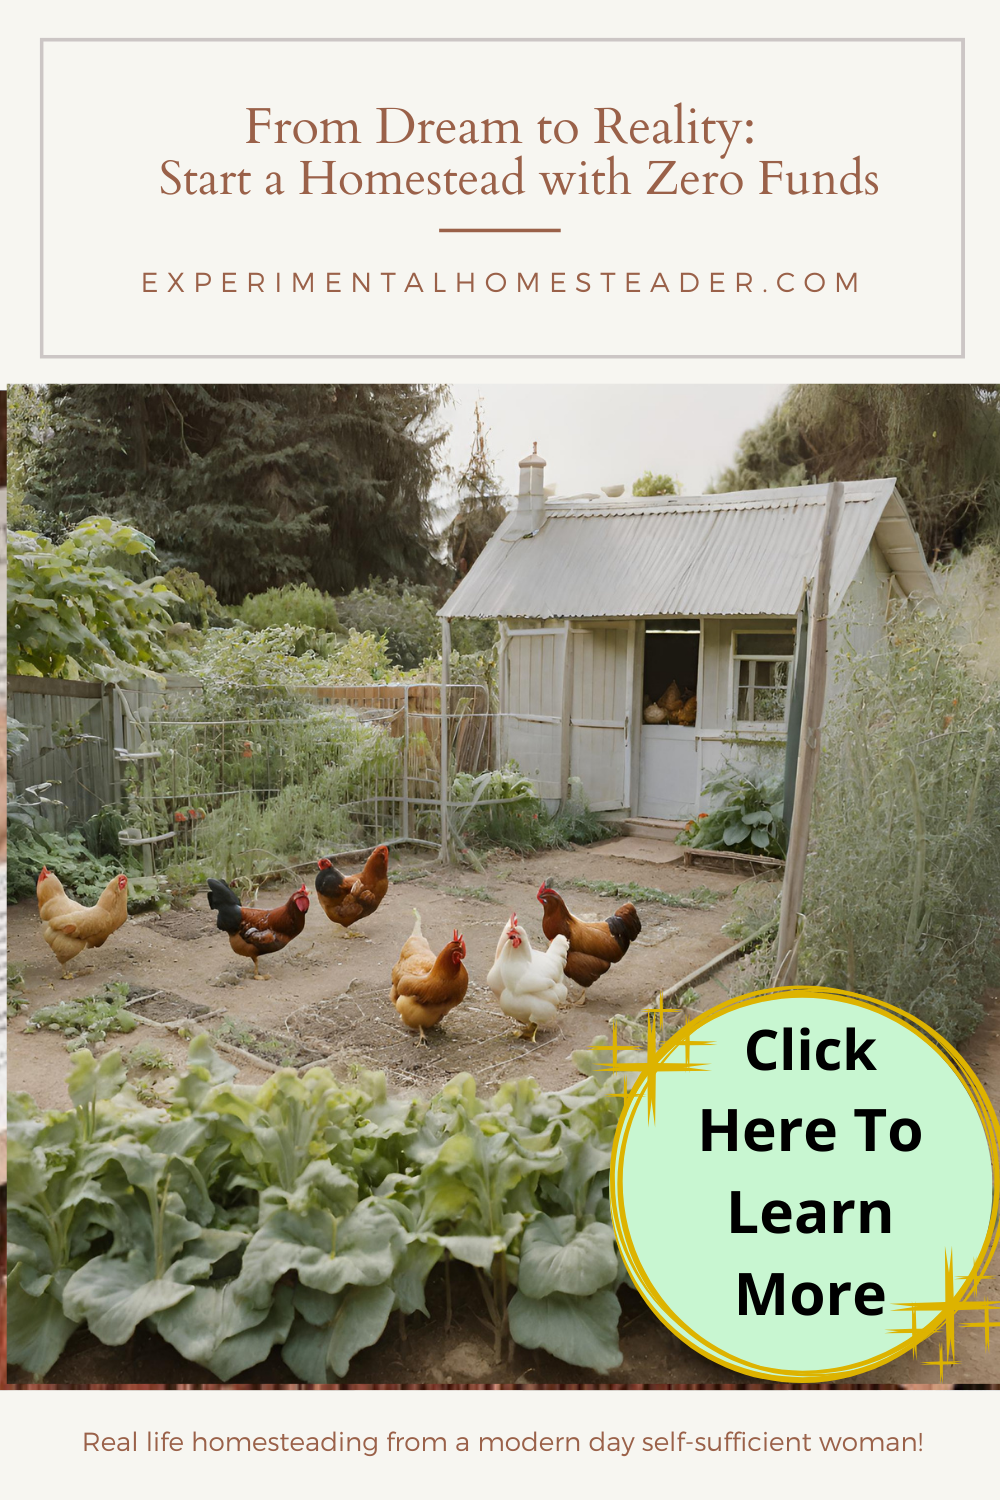 A small Kitchen garden on a homestead property with chickens close by